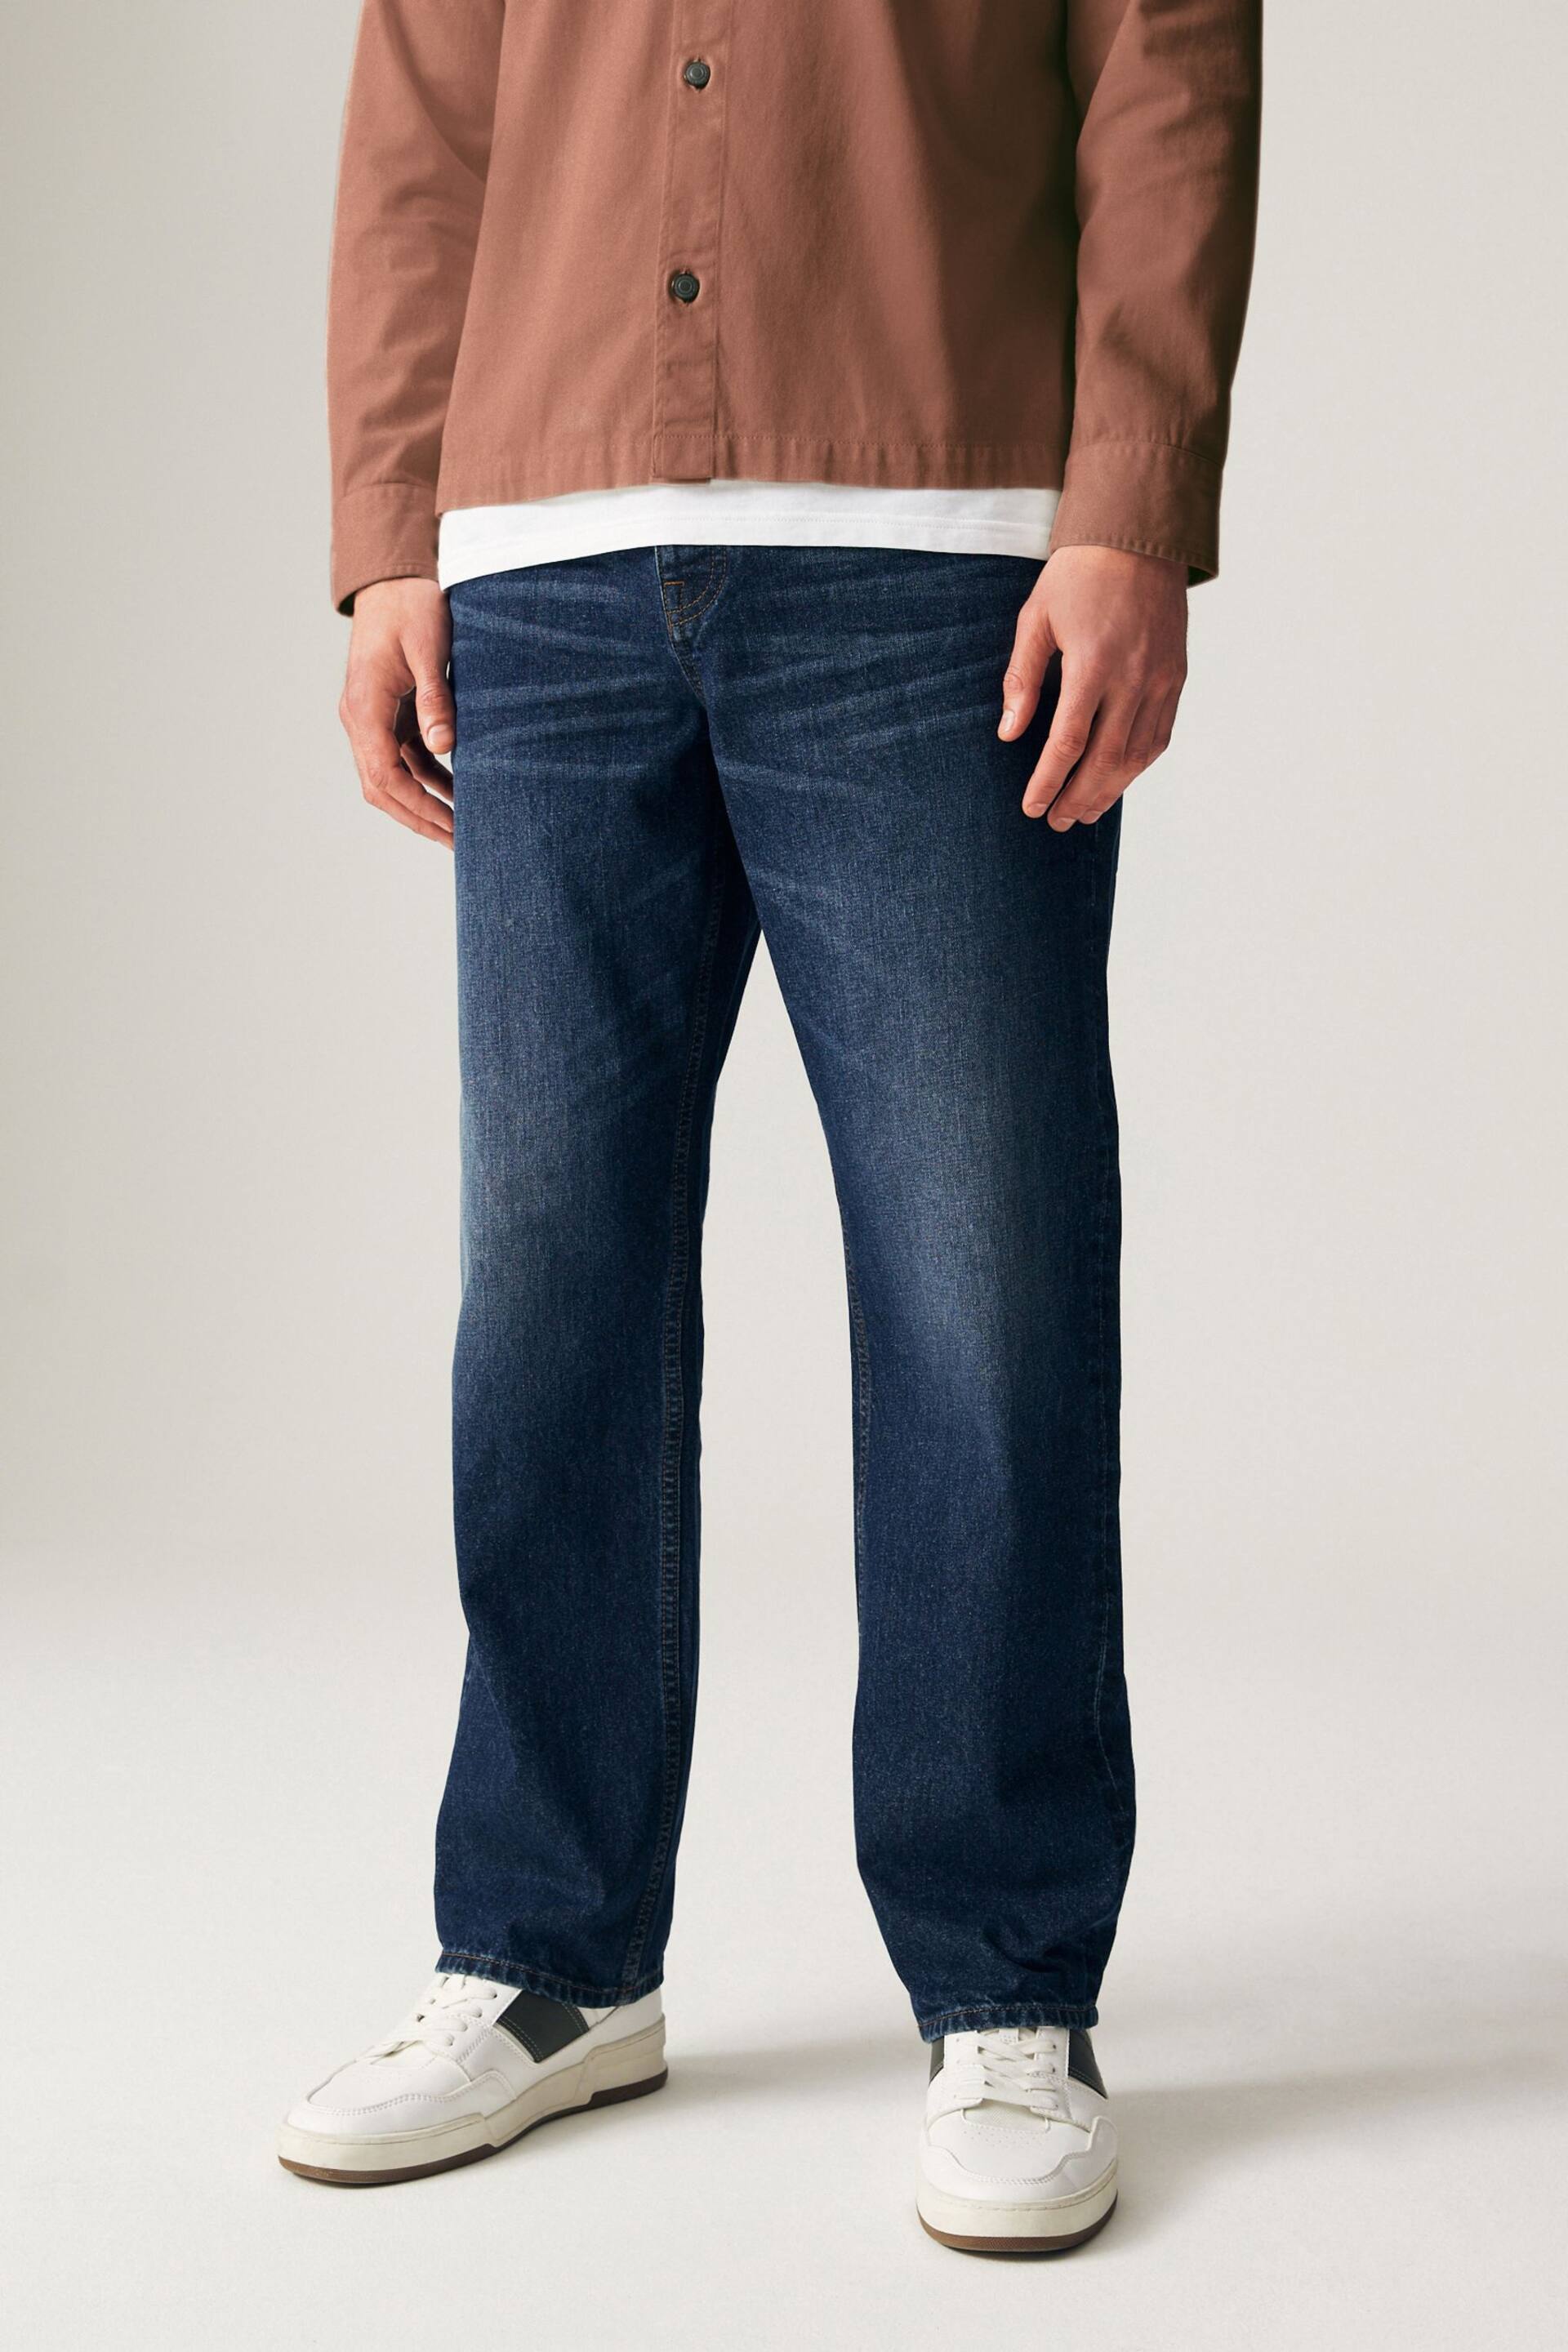 Blue Mid Relaxed Fit 100% Cotton Authentic Jeans - Image 1 of 12